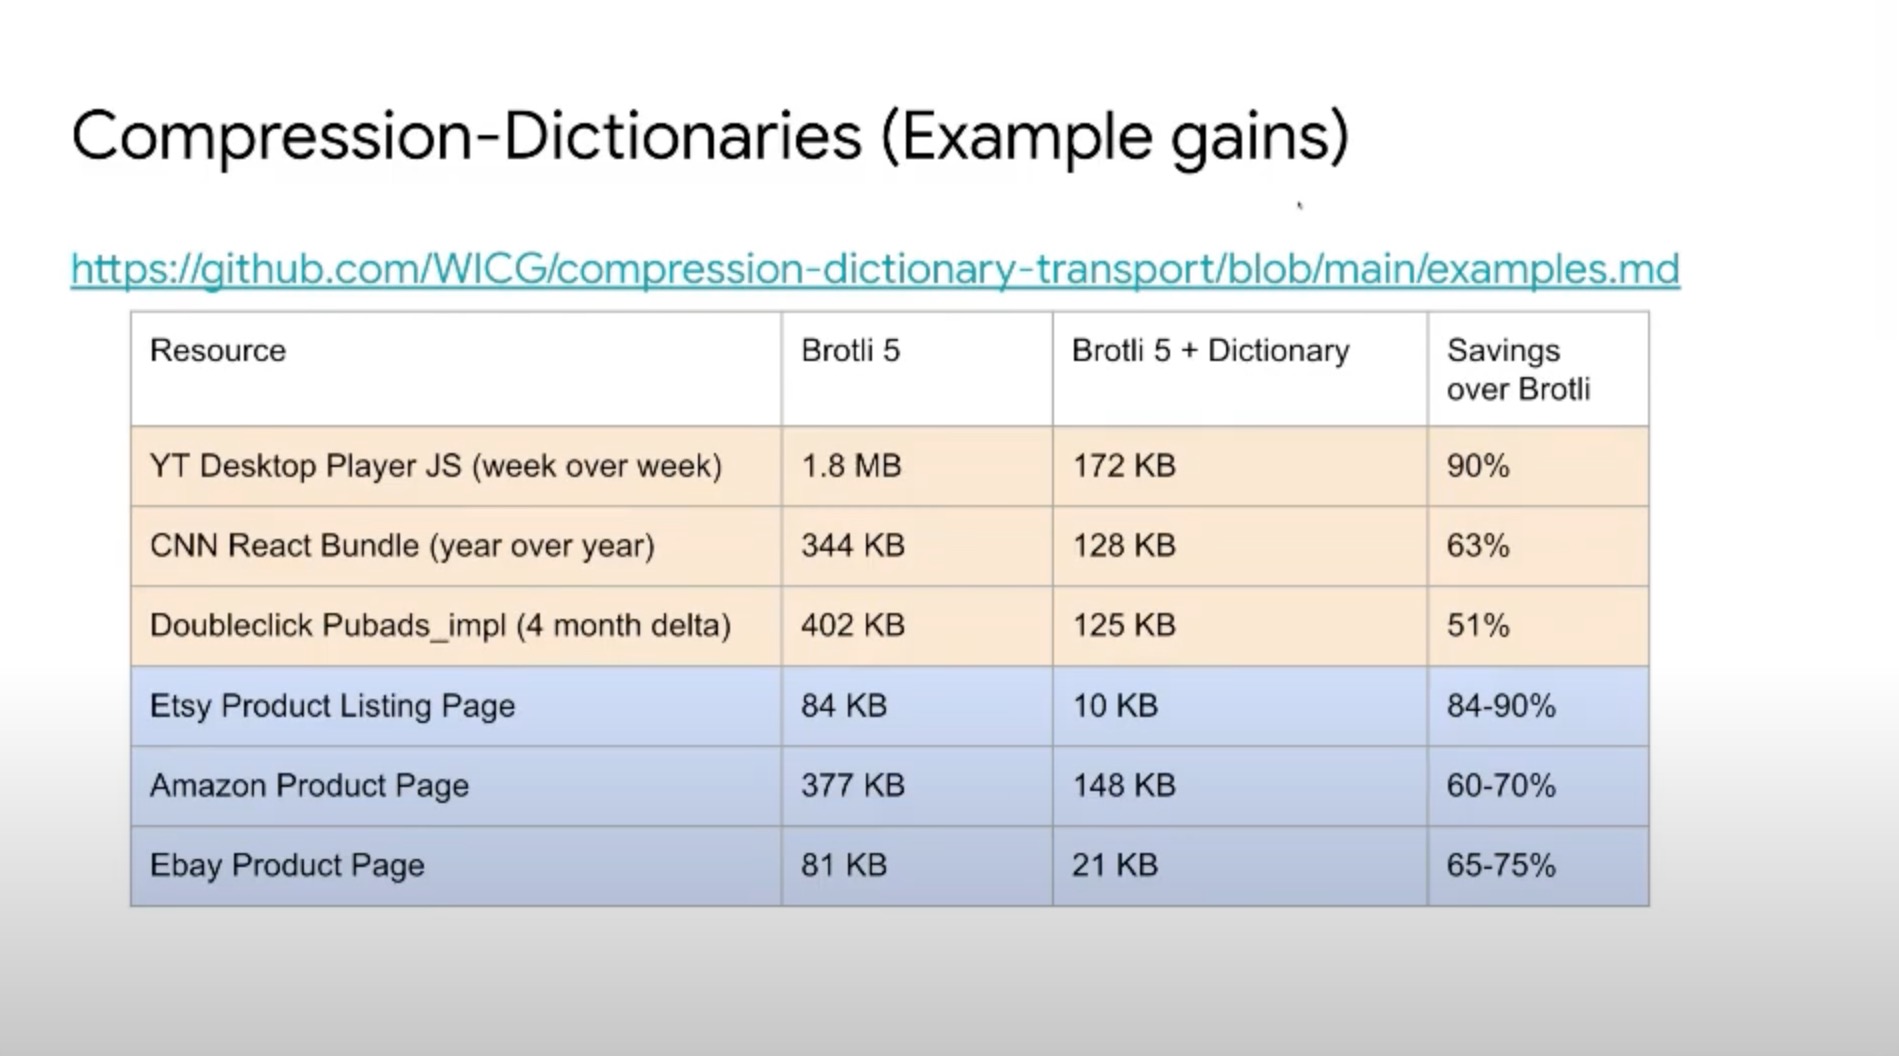 Image showing example returns on experiments with Compression Dictionaries ranging from 51-90% savings